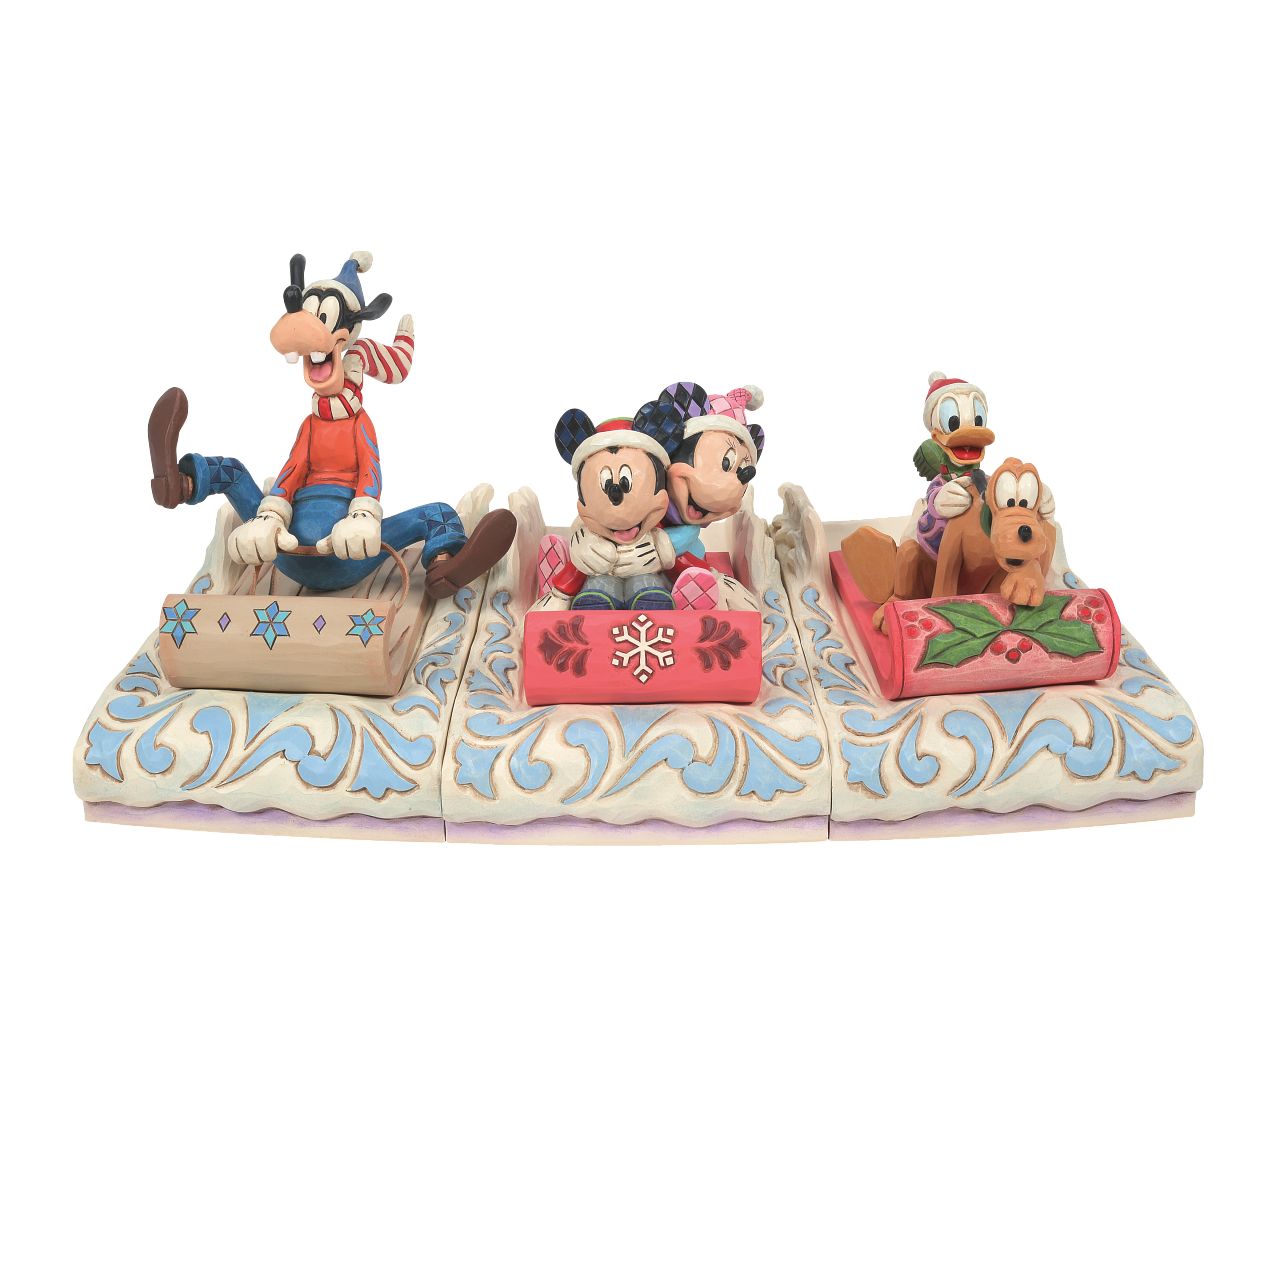 Disney Traditions Jim Shore Donald and Pluto Sledding  This pair prepares for a high velocity ride down Christmas Mountain. Bundled up, Donald grabs hold of Pluto for extra support as their sled coasts through the snow covered scenery in this Jim Shore design. With friends like these, winter is warmer.